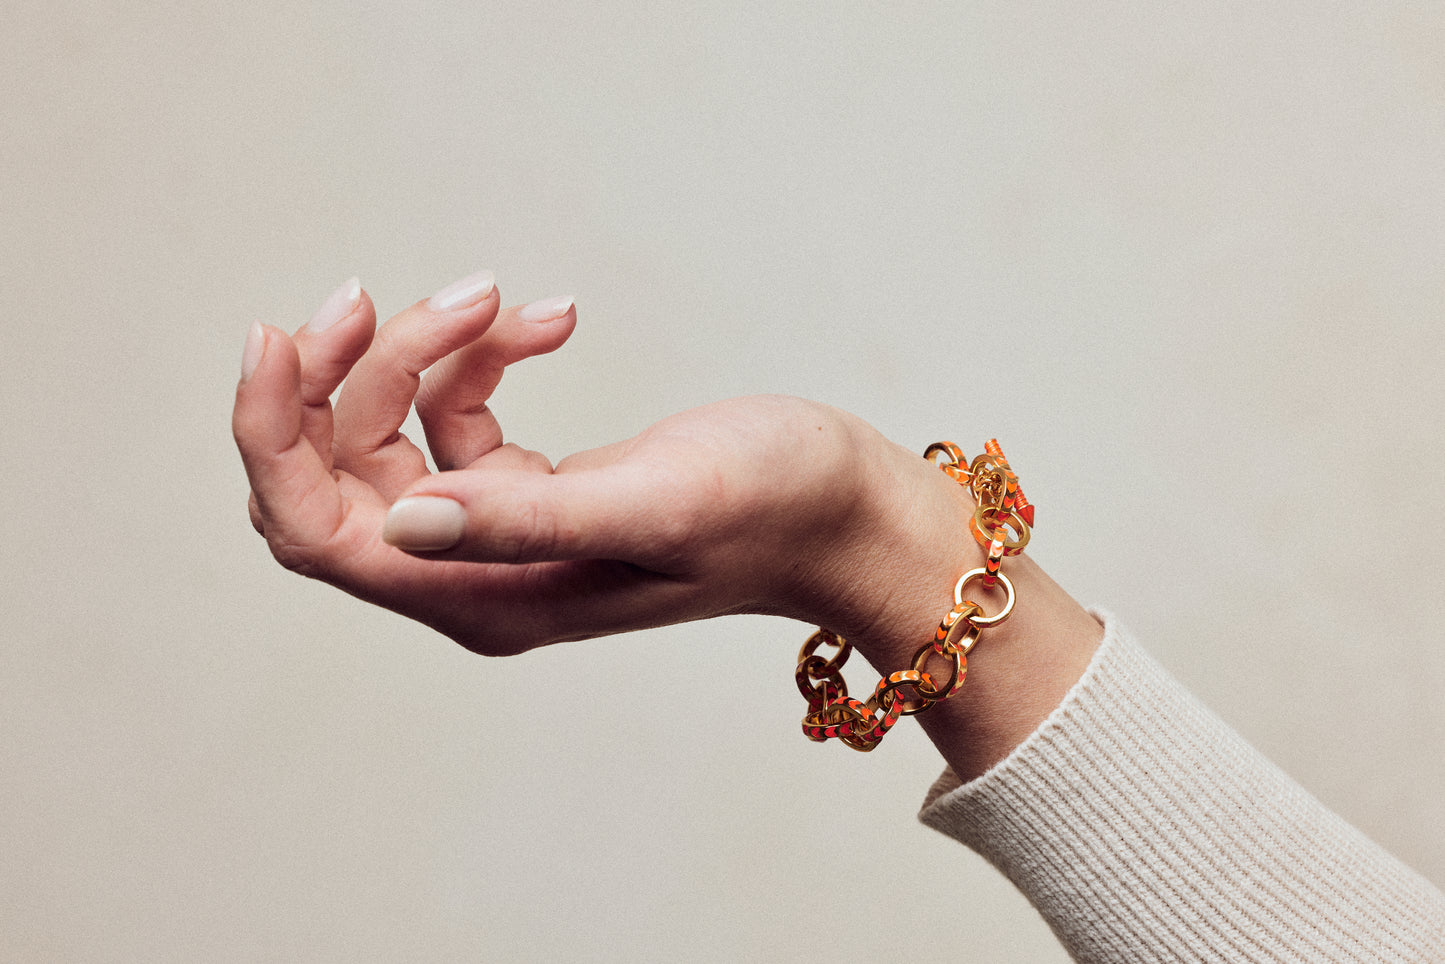 image of spark gold chain bracelet in orange and gold on wrist of woman with white skin wearing cream ribbed top showing hand upturned